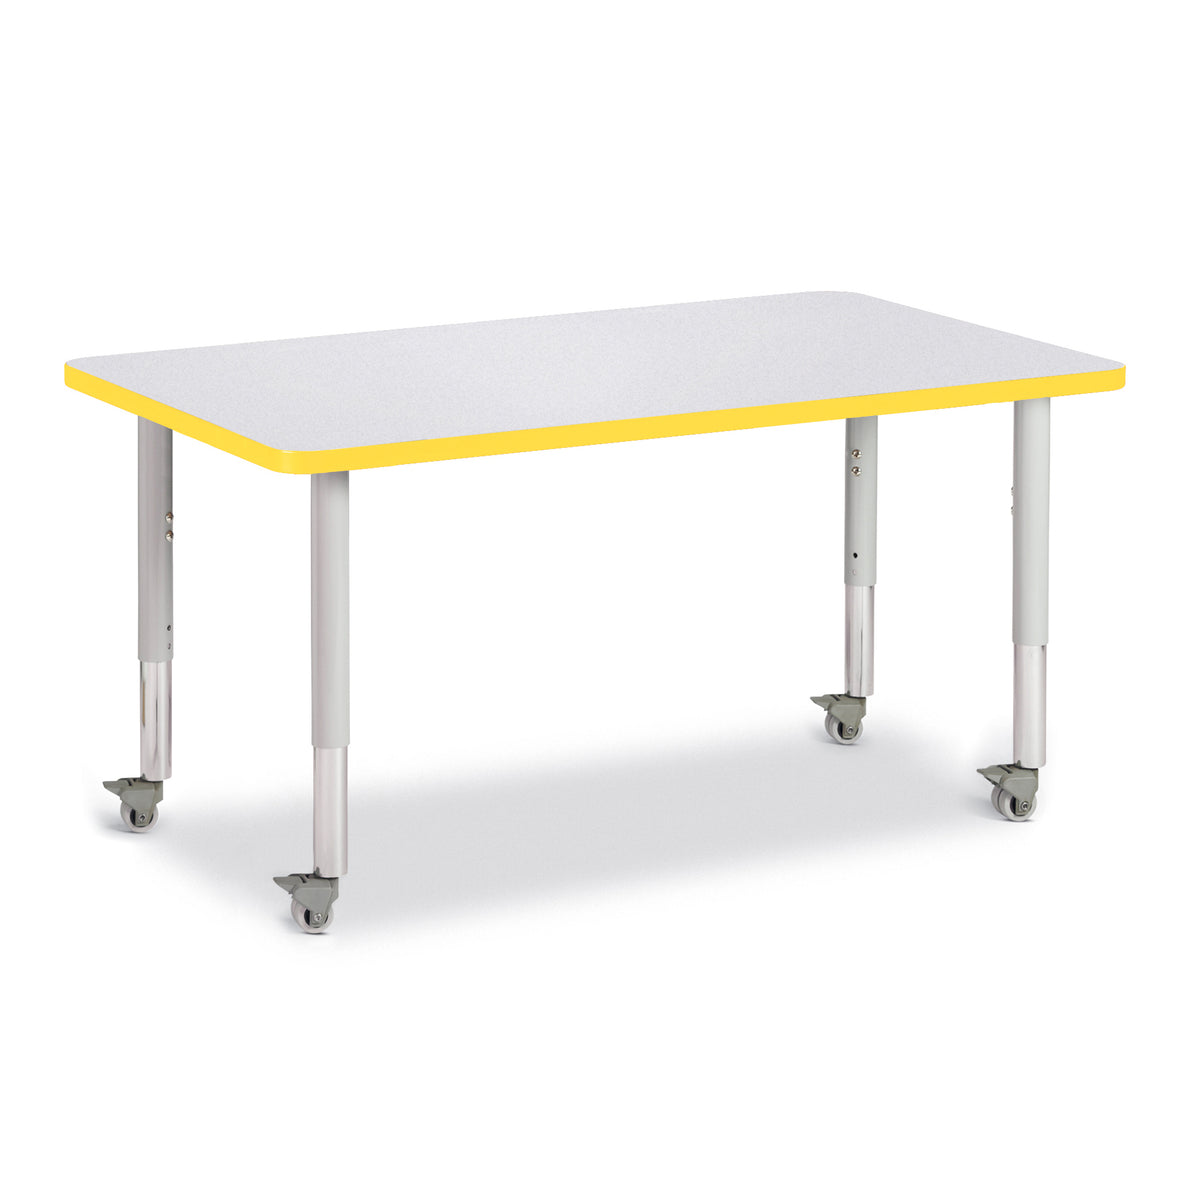 6473JCM007, Berries Rectangle Activity Table - 30" X 48", Mobile - Freckled Gray/Yellow/Gray